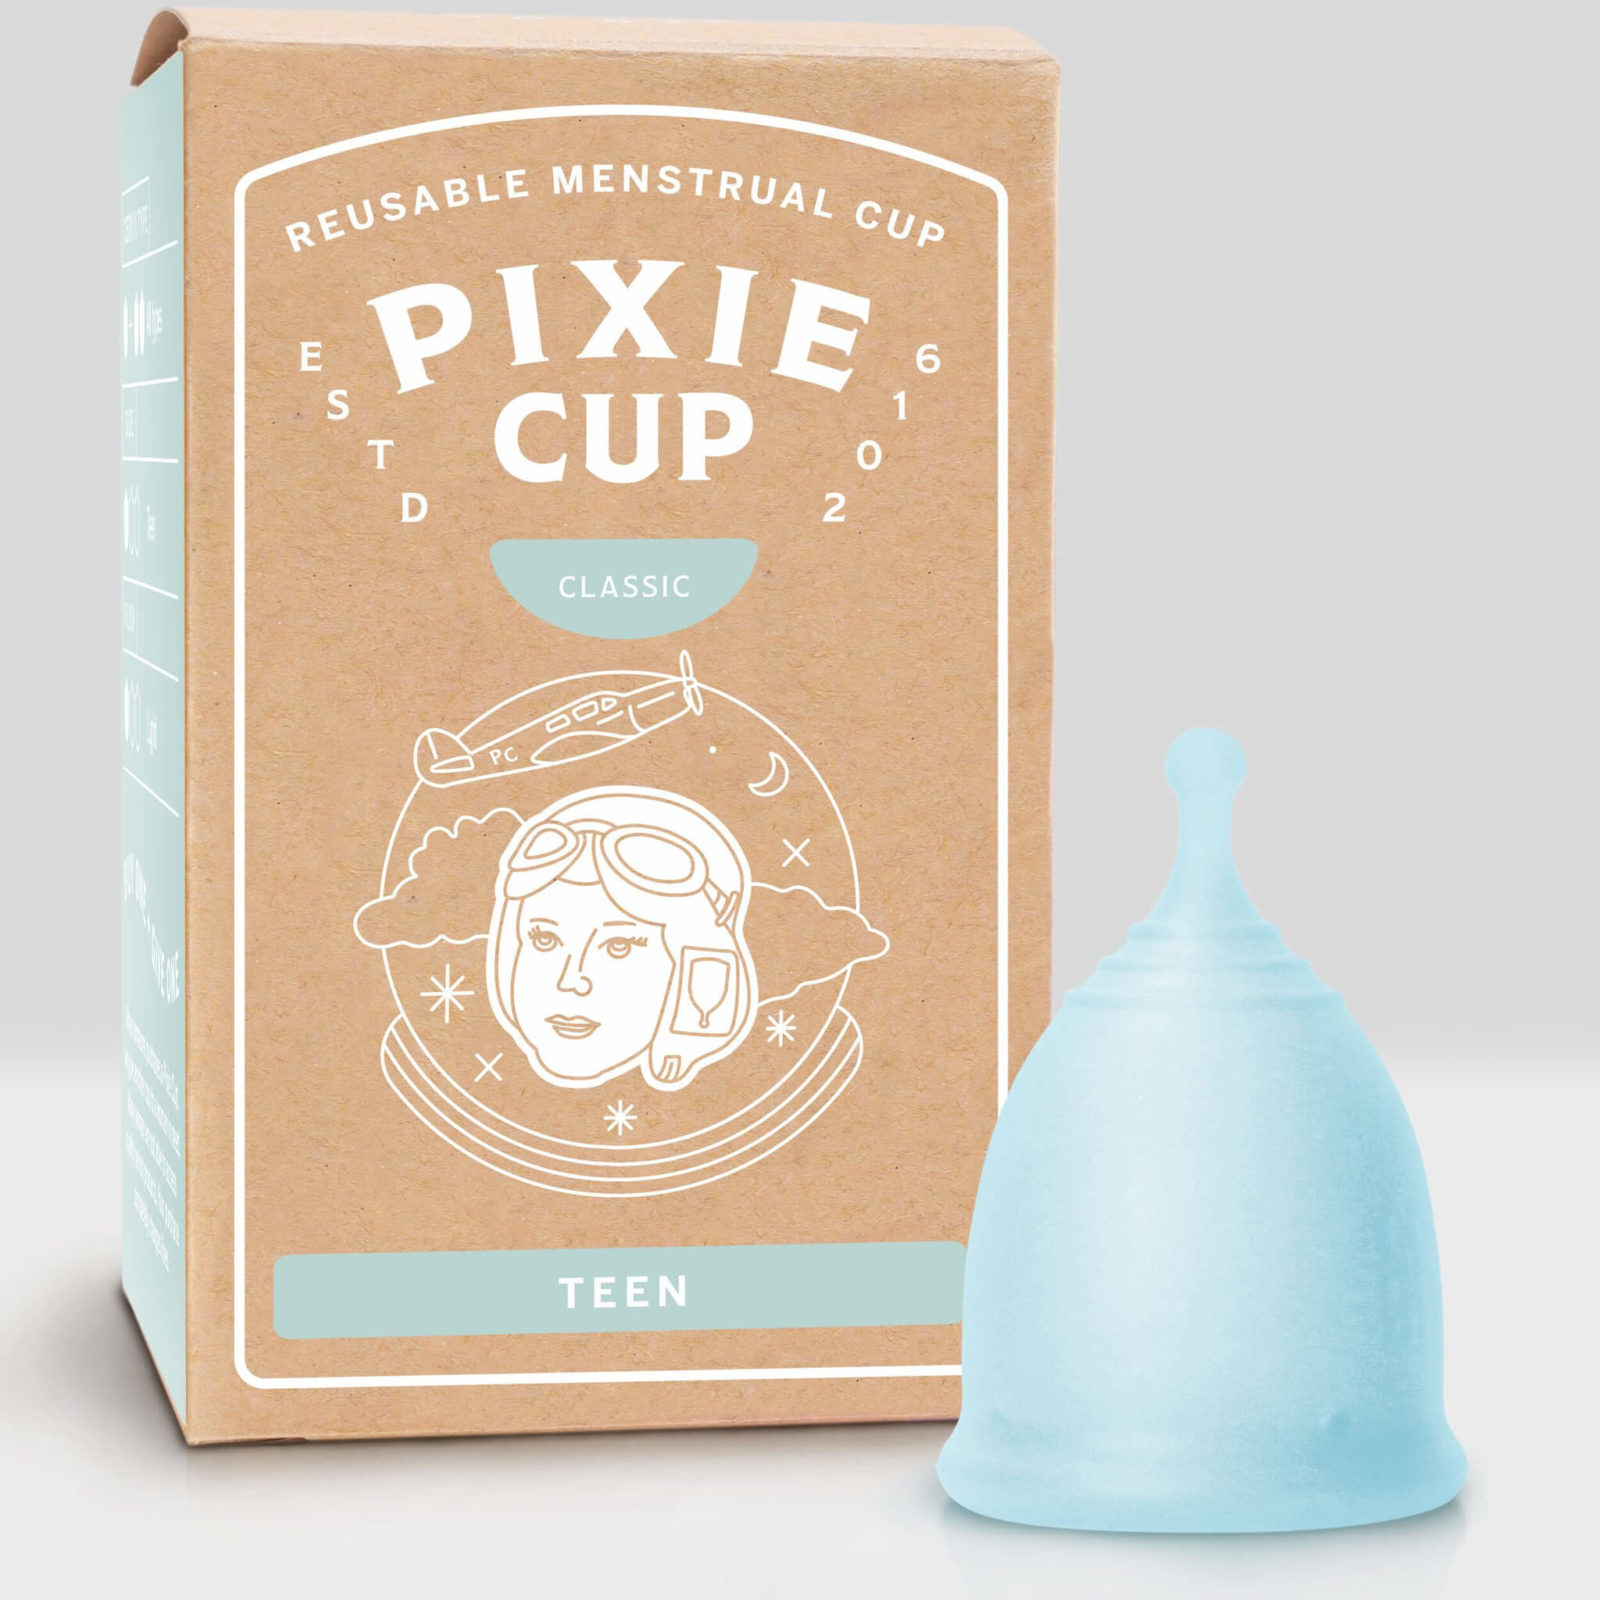 Pixie Menstrual Cup - Pixie Teen Cup